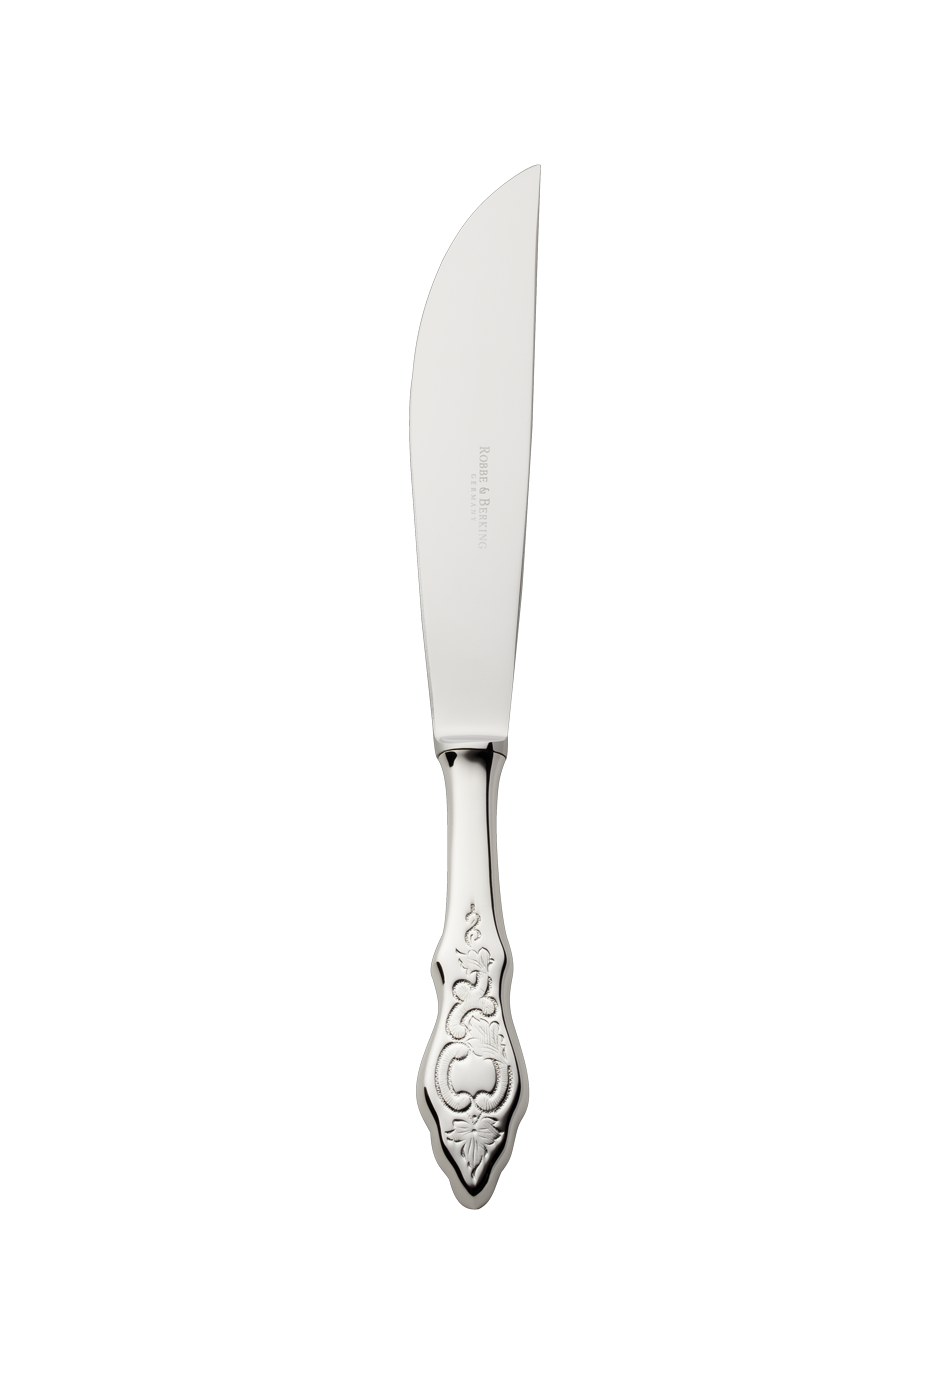 Ostfriesen Carving Knife (150g massive silverplated)